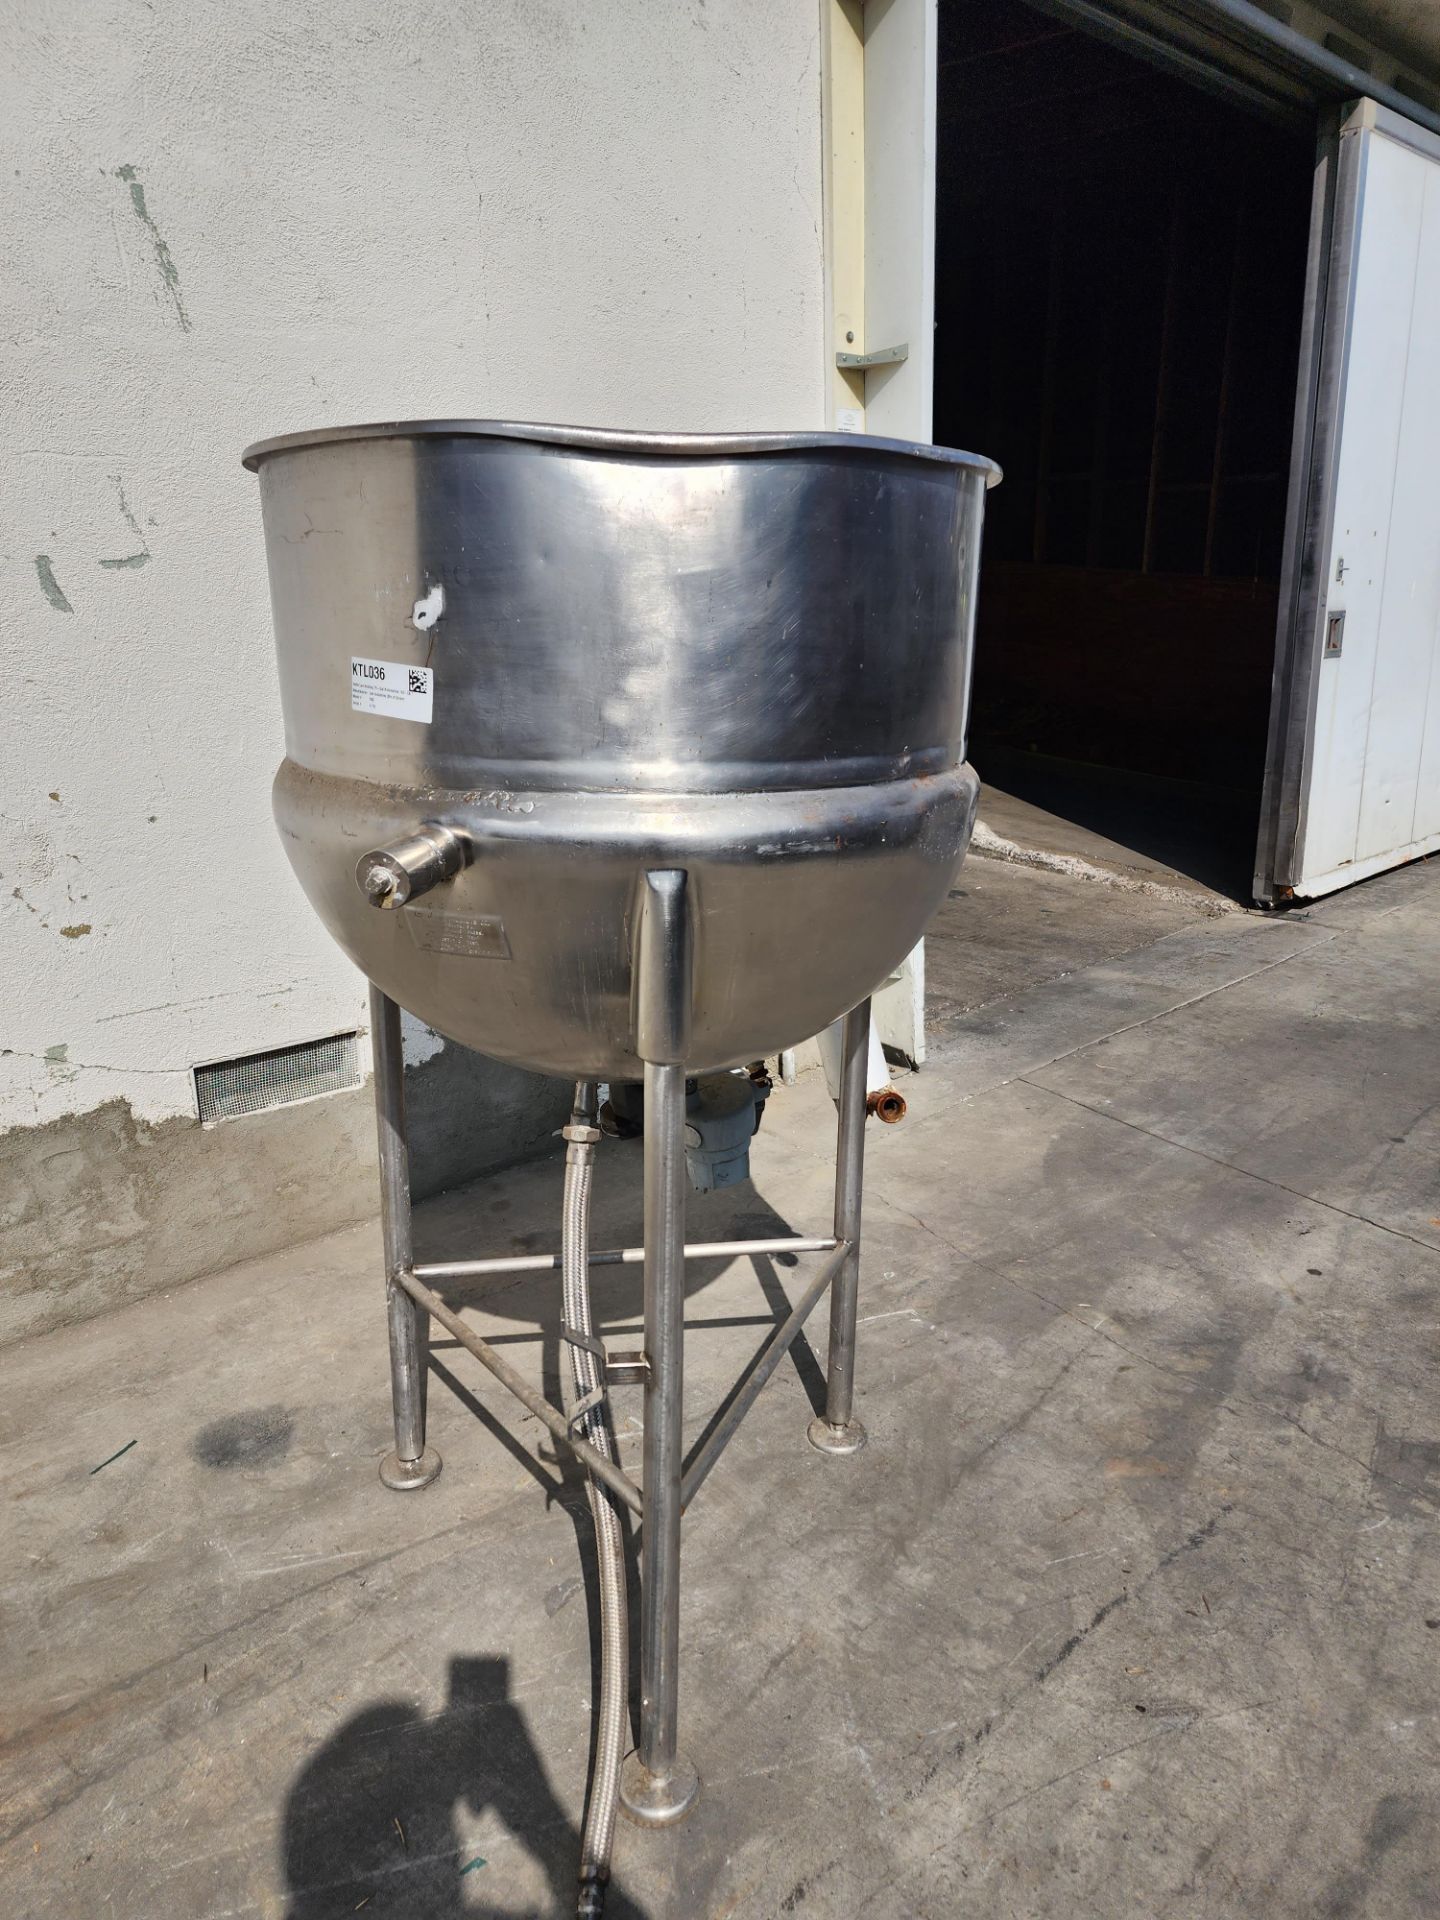 Lee Steam Fired Jacketed Kettle, Model 75D, SN 417 U, 75 Gallon Capacity. - Image 3 of 8